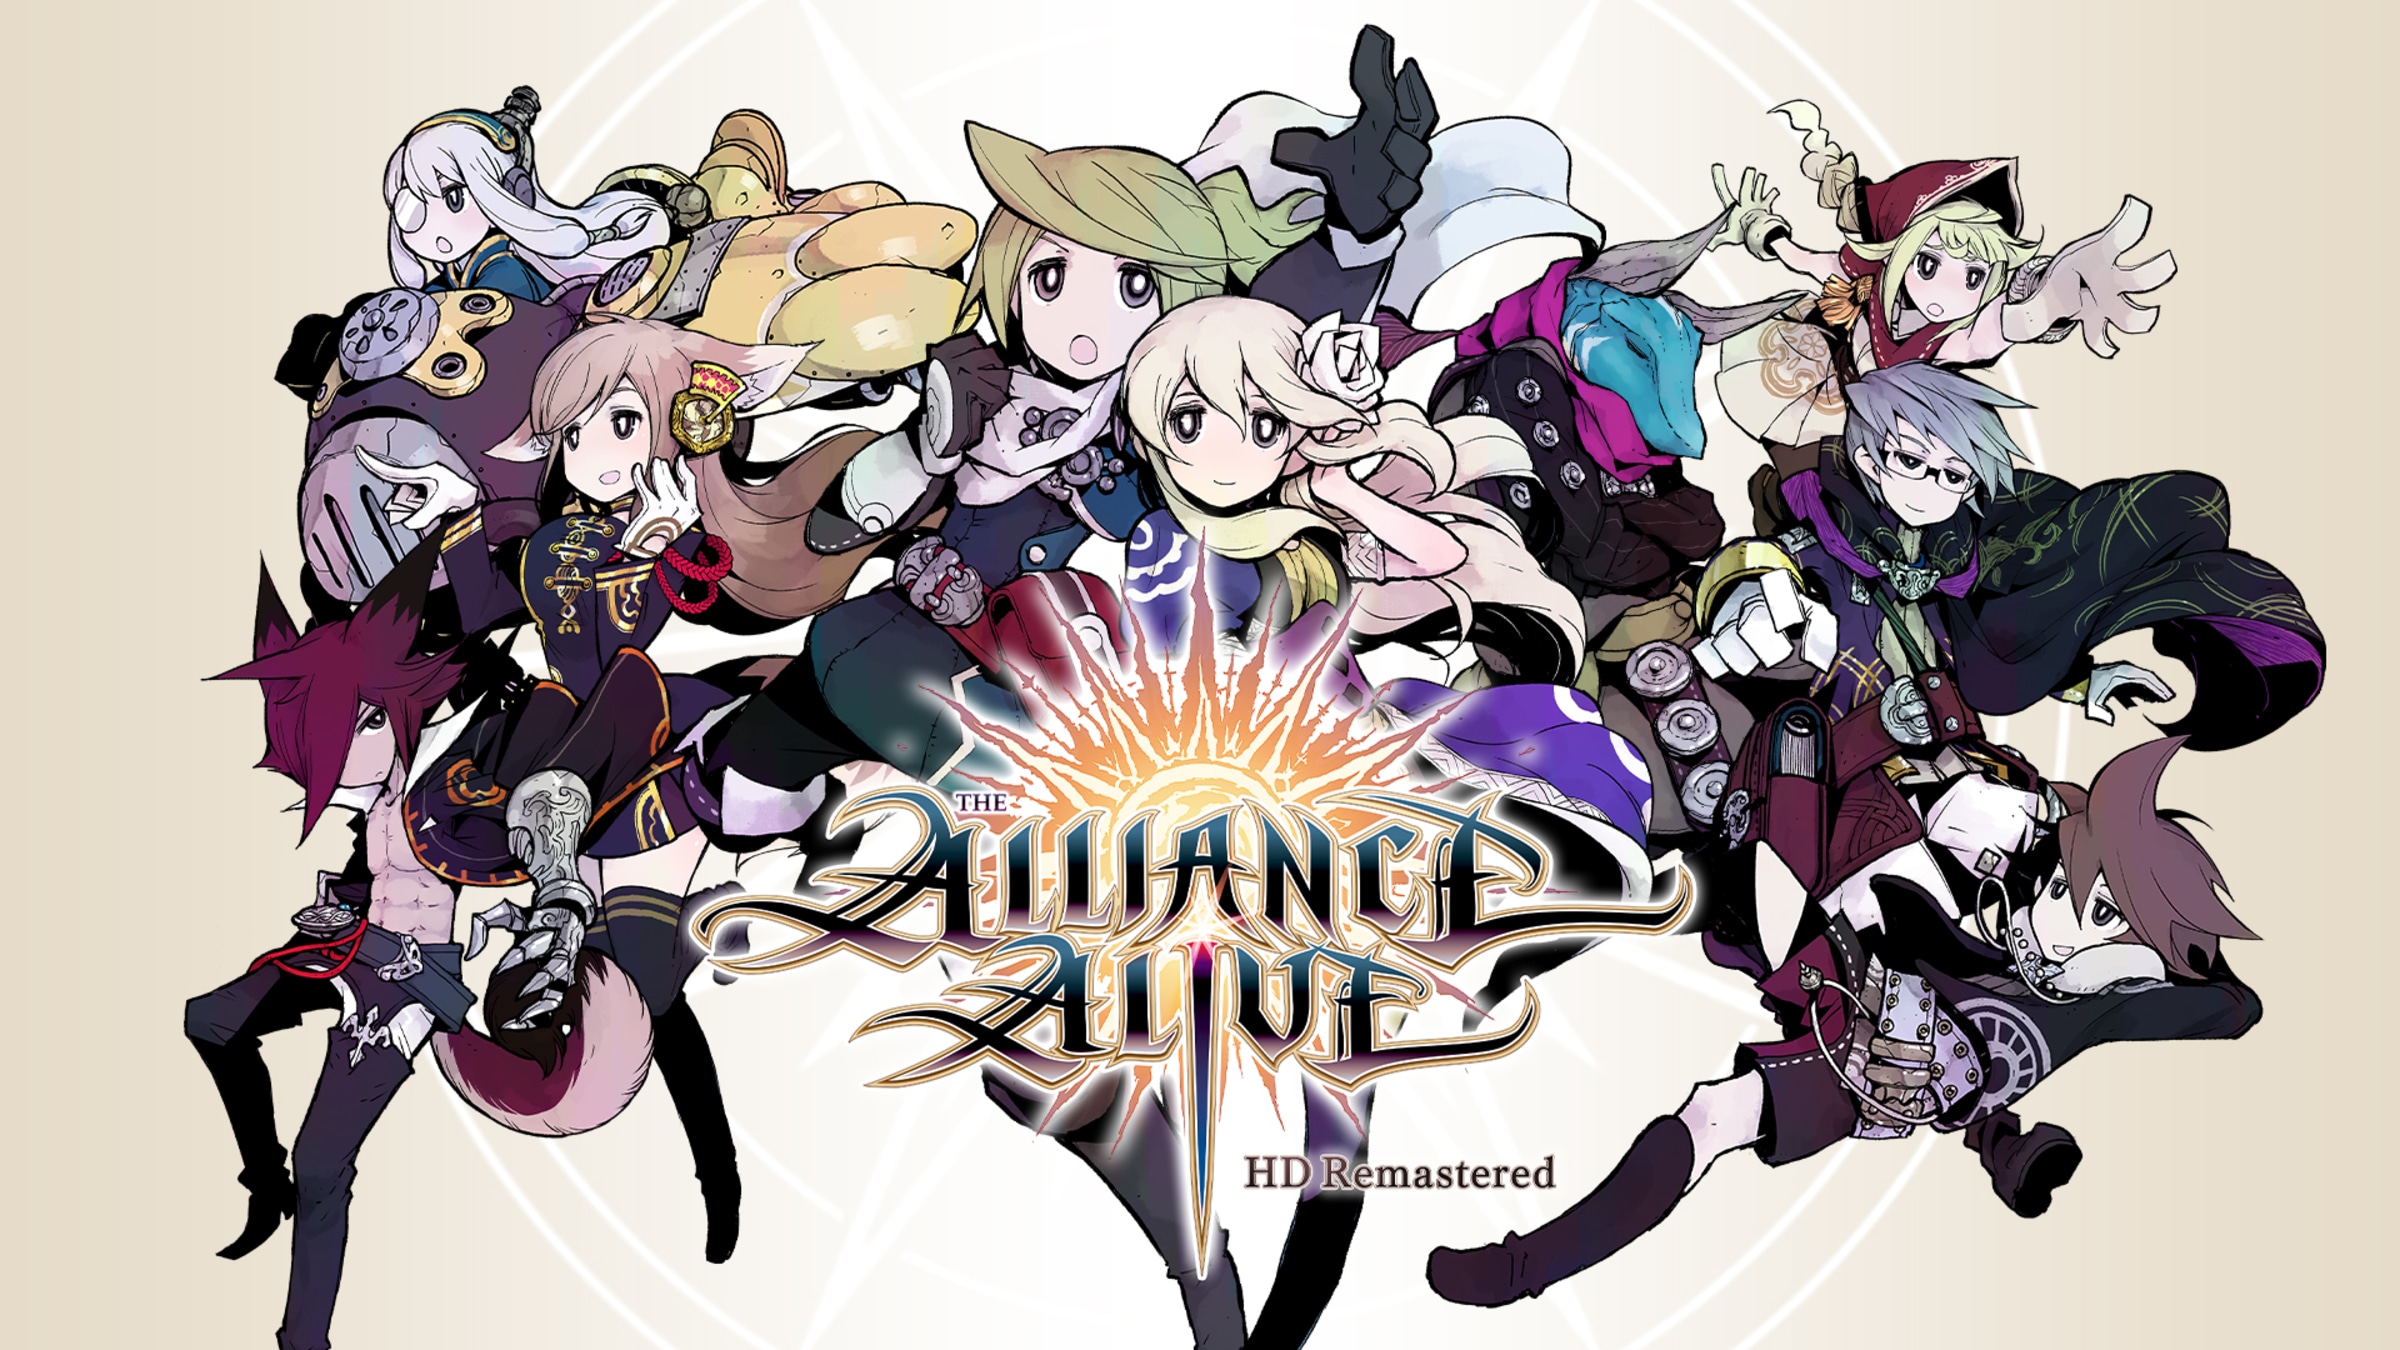 The Alliance Alive HD Remastered for Nintendo Switch - Nintendo